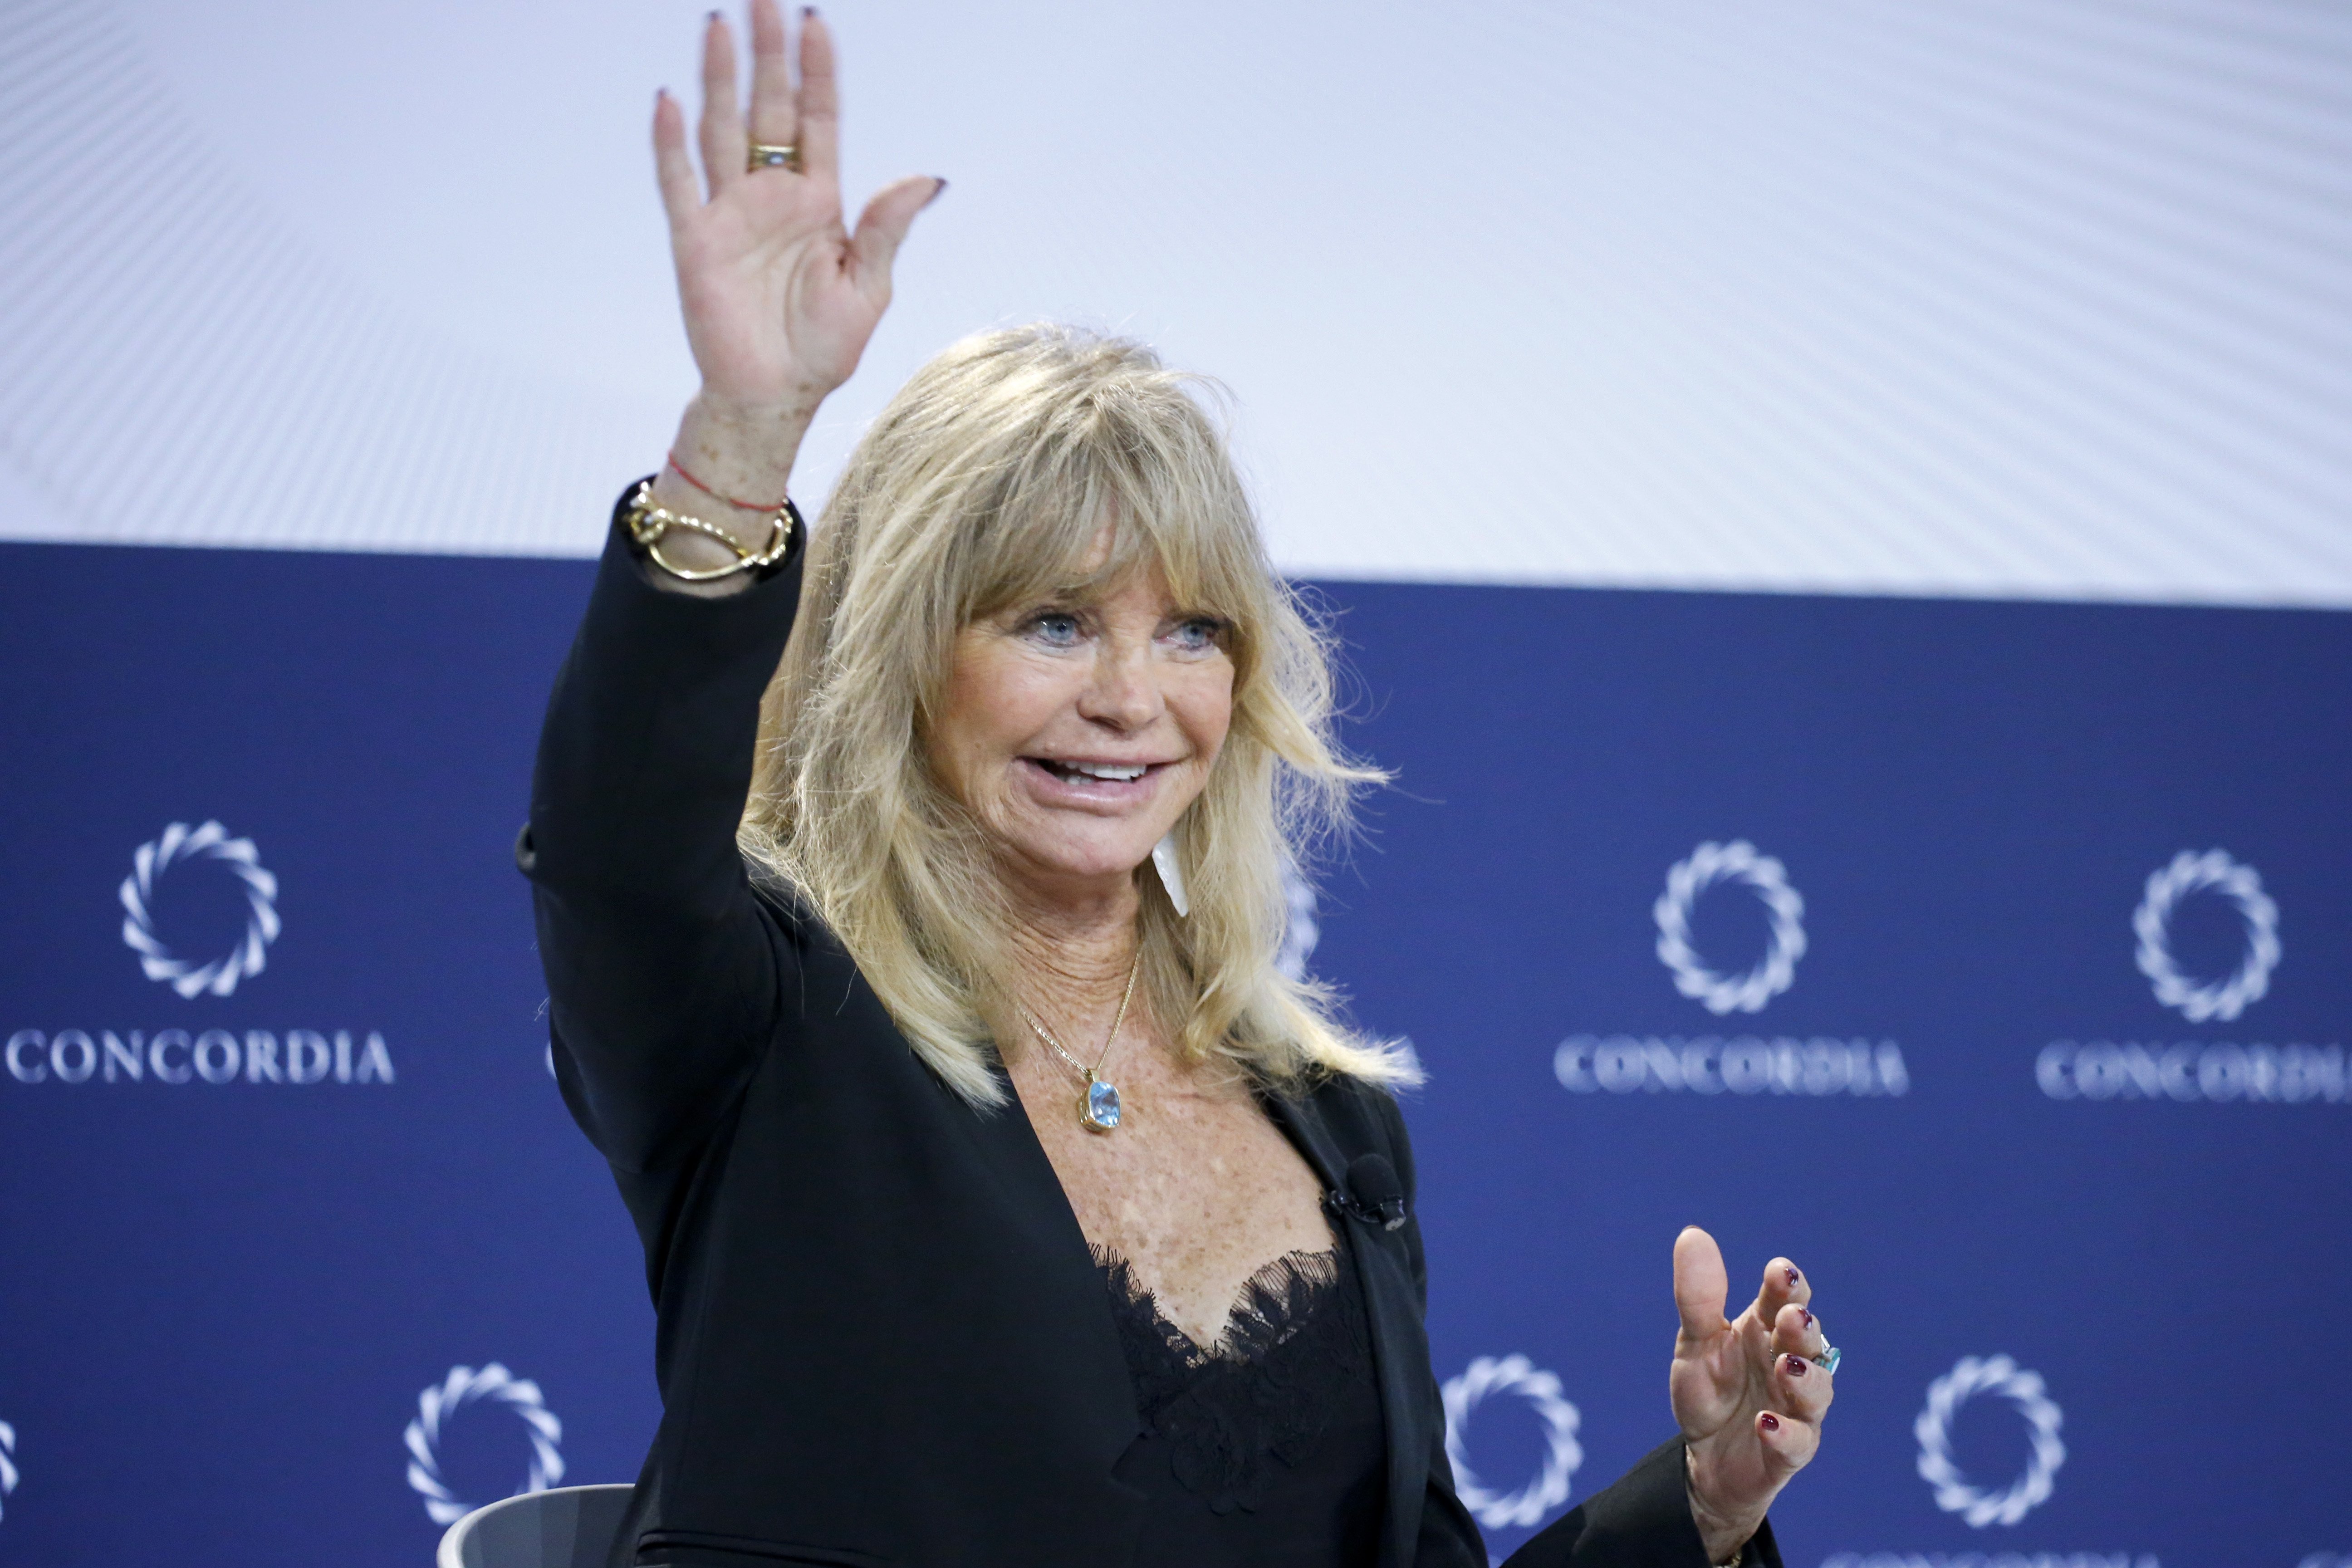 Goldie Hawn, actress and Founder of MindUP and The Goldie Hawn Foundation, speaks on stage during The 2022 Concordia Annual Summit - Day 2 at Sheraton New York on September 20, 2022, in New York City. | Source: Getty Images